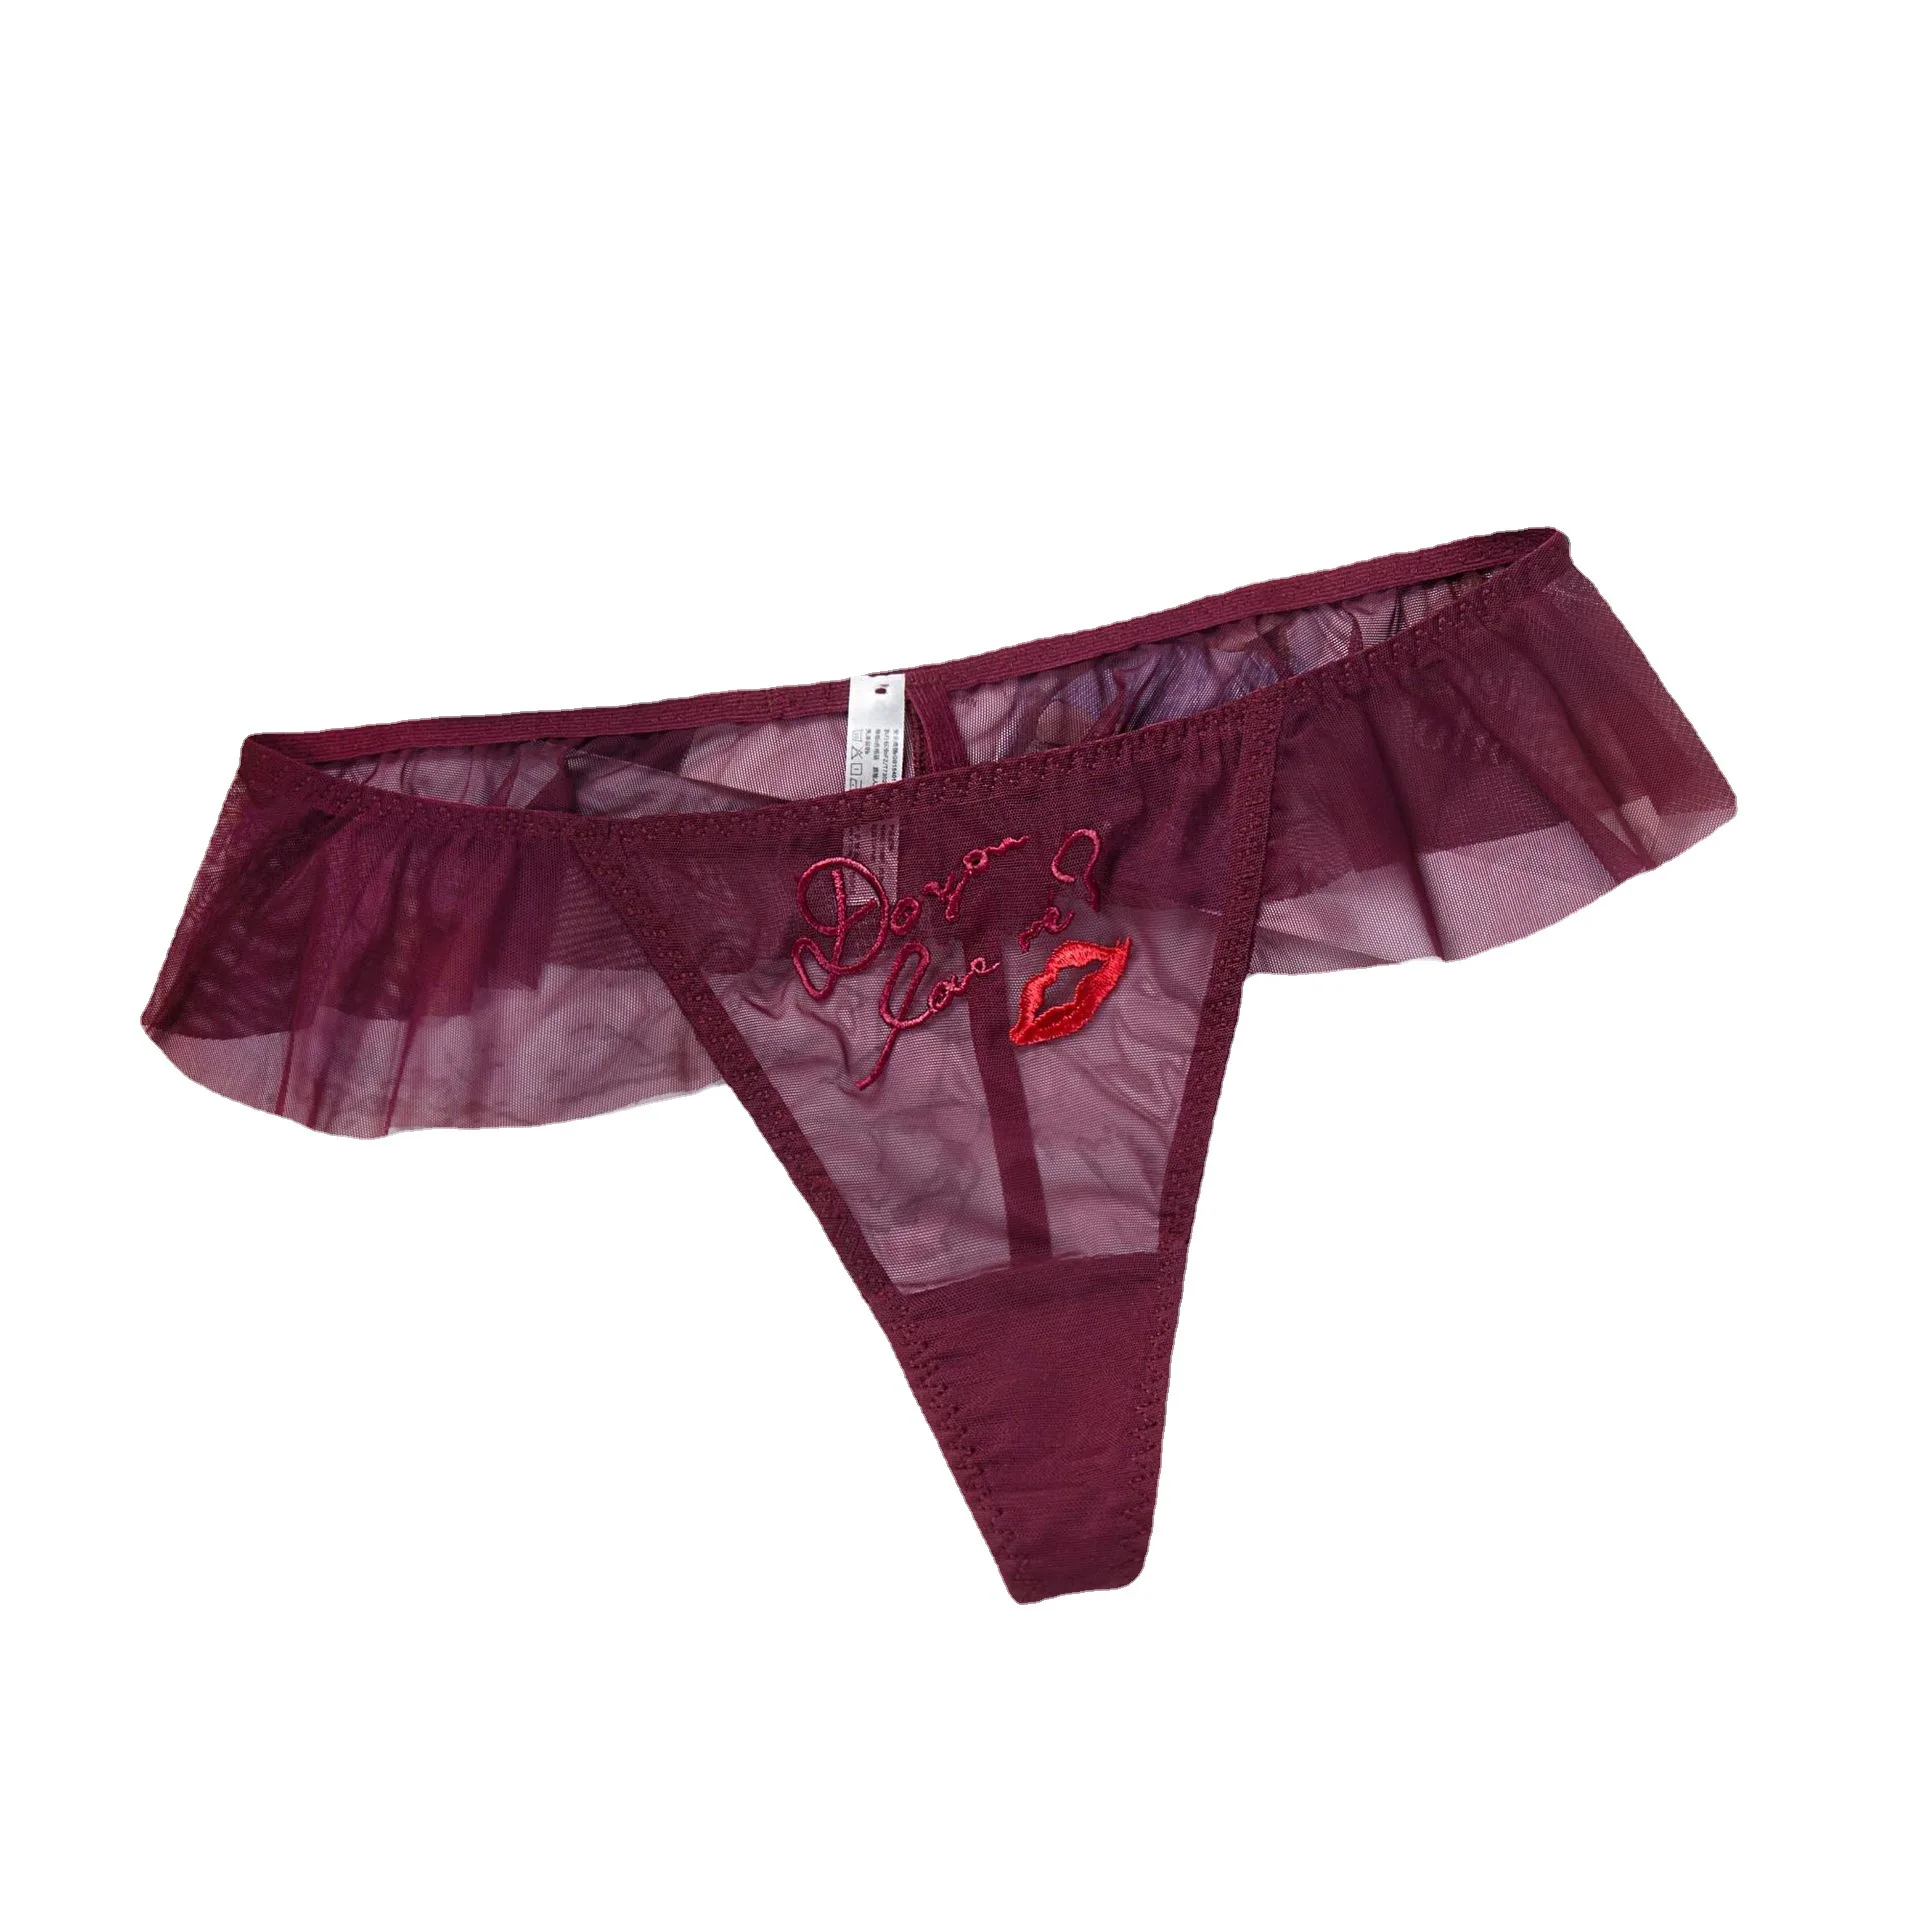 

UNICE wholesale in stock fashion embroidery string underwear sexy hot women g-strings and thongs with tangas sexy panties thong, 5 colors in stock